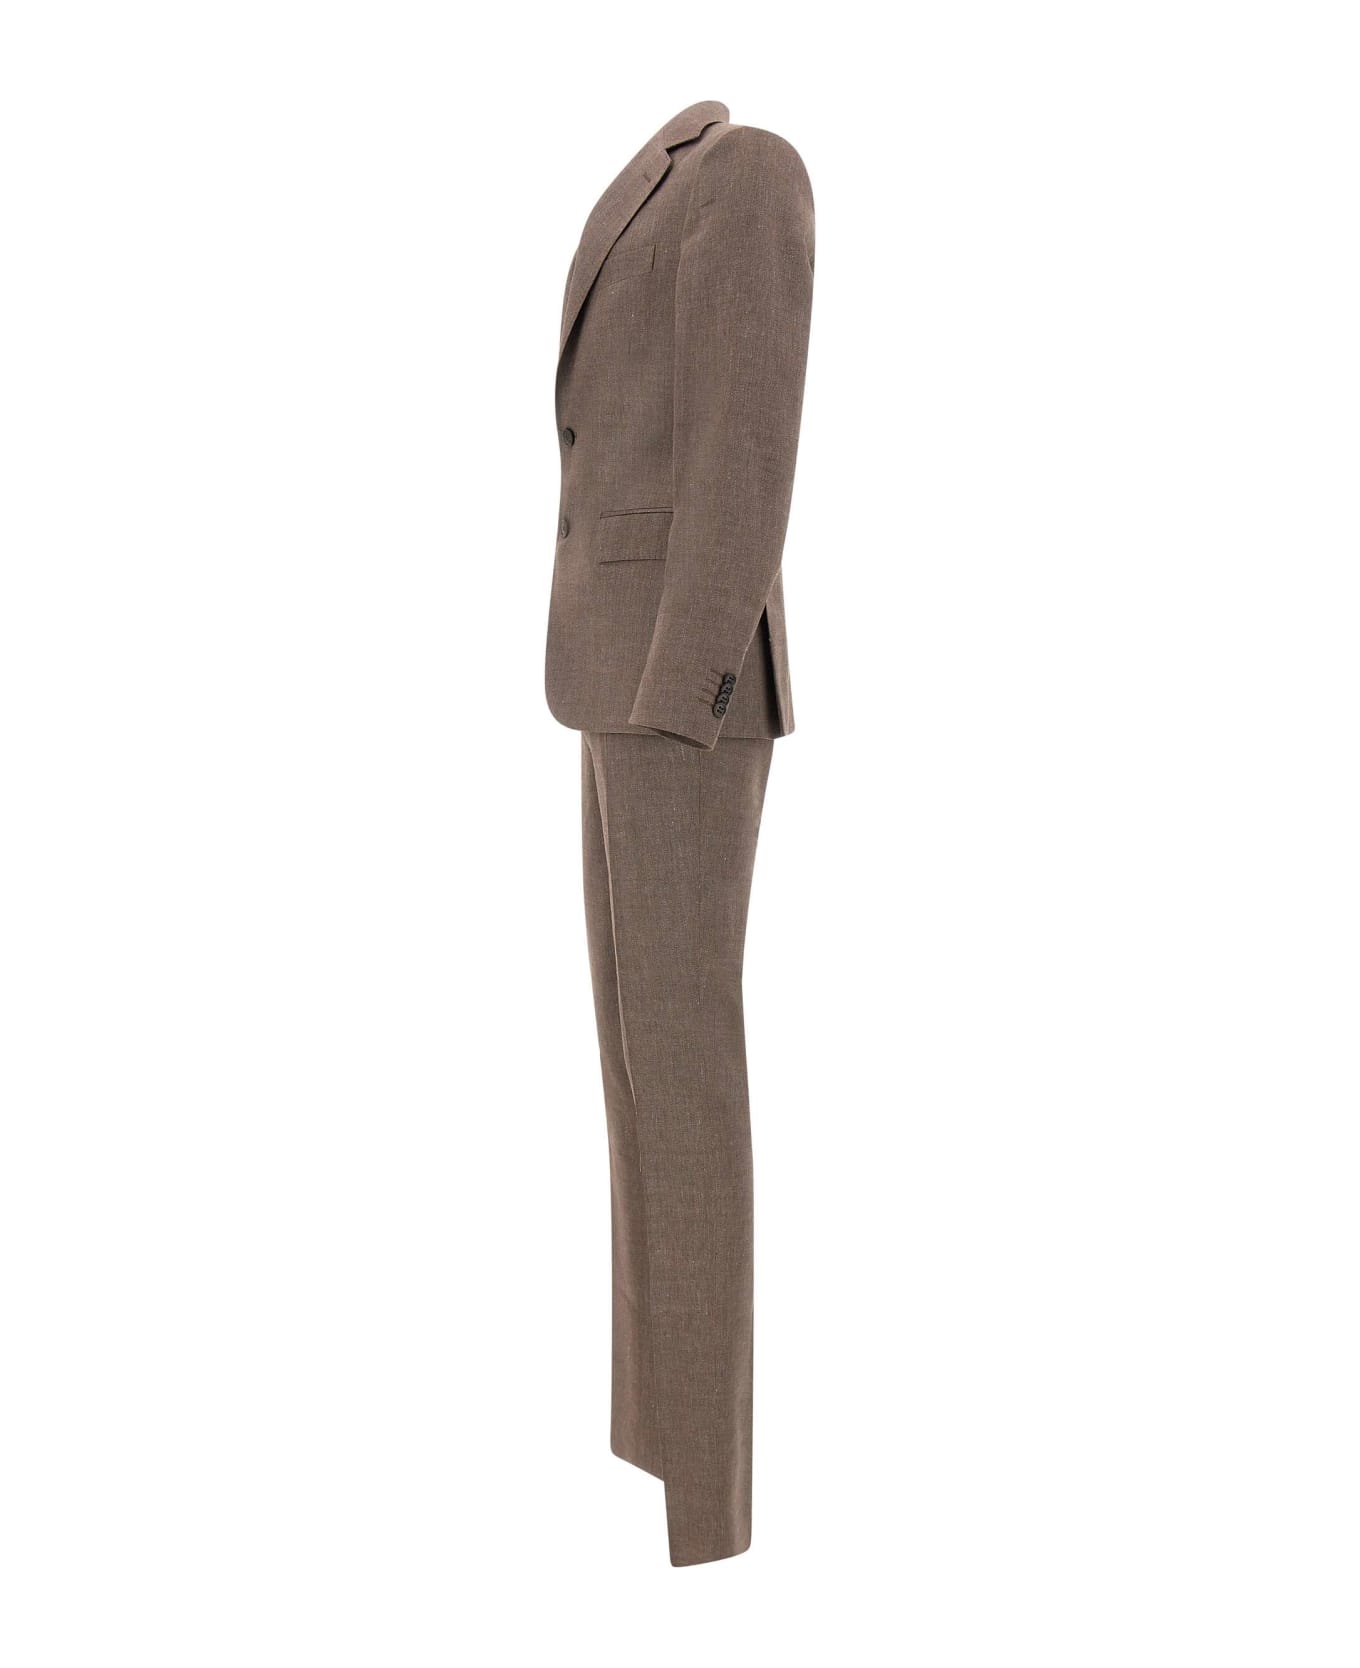 Brian Dales Linen And Wool Two-piece Suit - BROWN